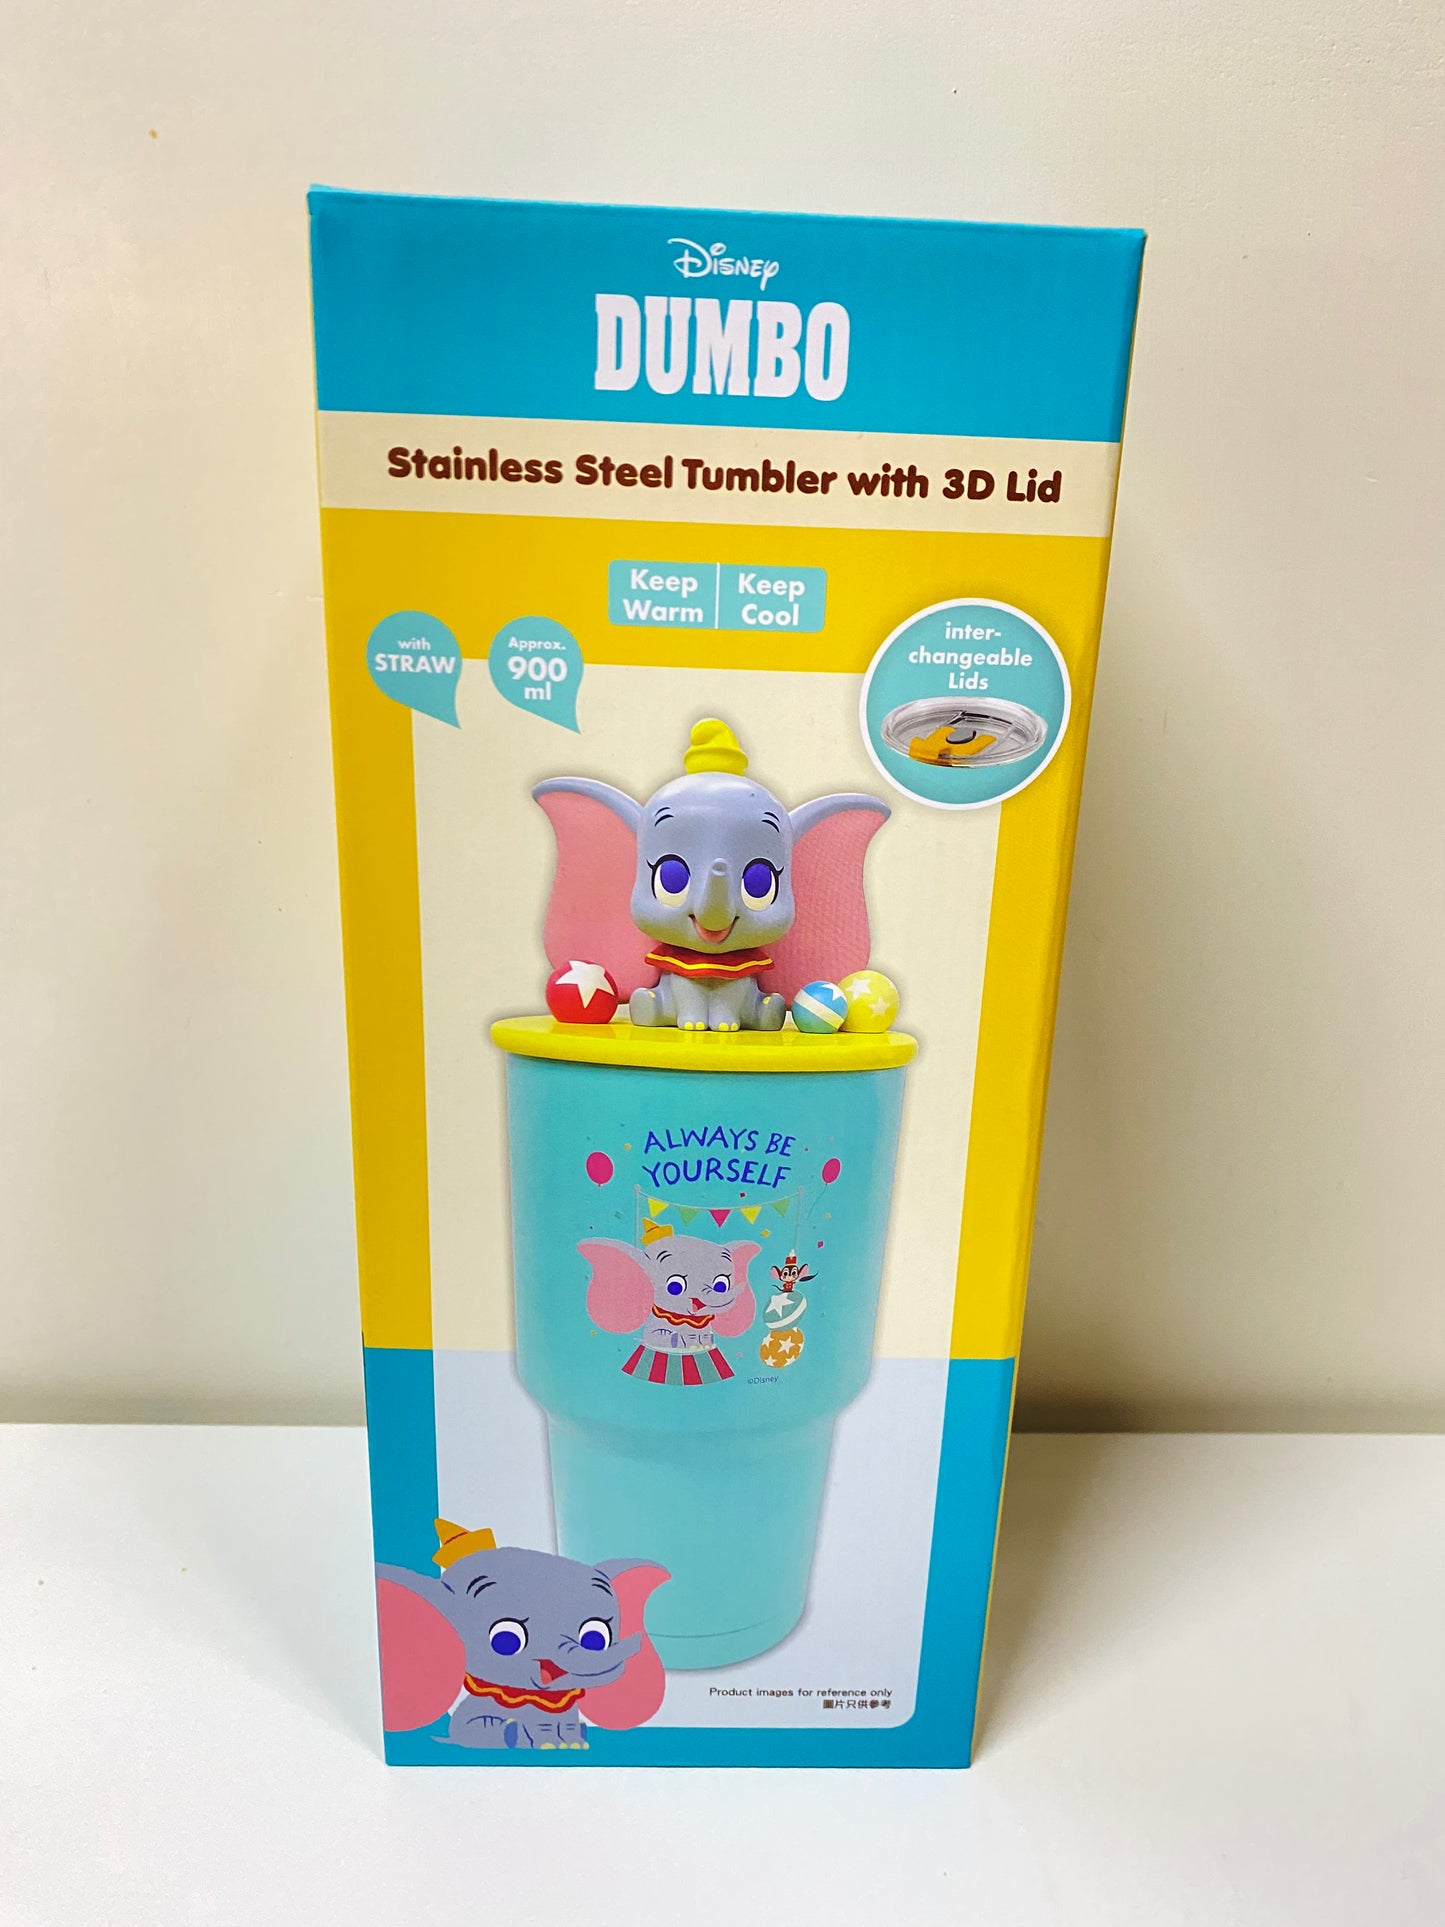 Stainless Steel Tumbler with 3D Lid 900ml | Dumbo - Keep Warm & Cool Cup Kitchenware Kitchen